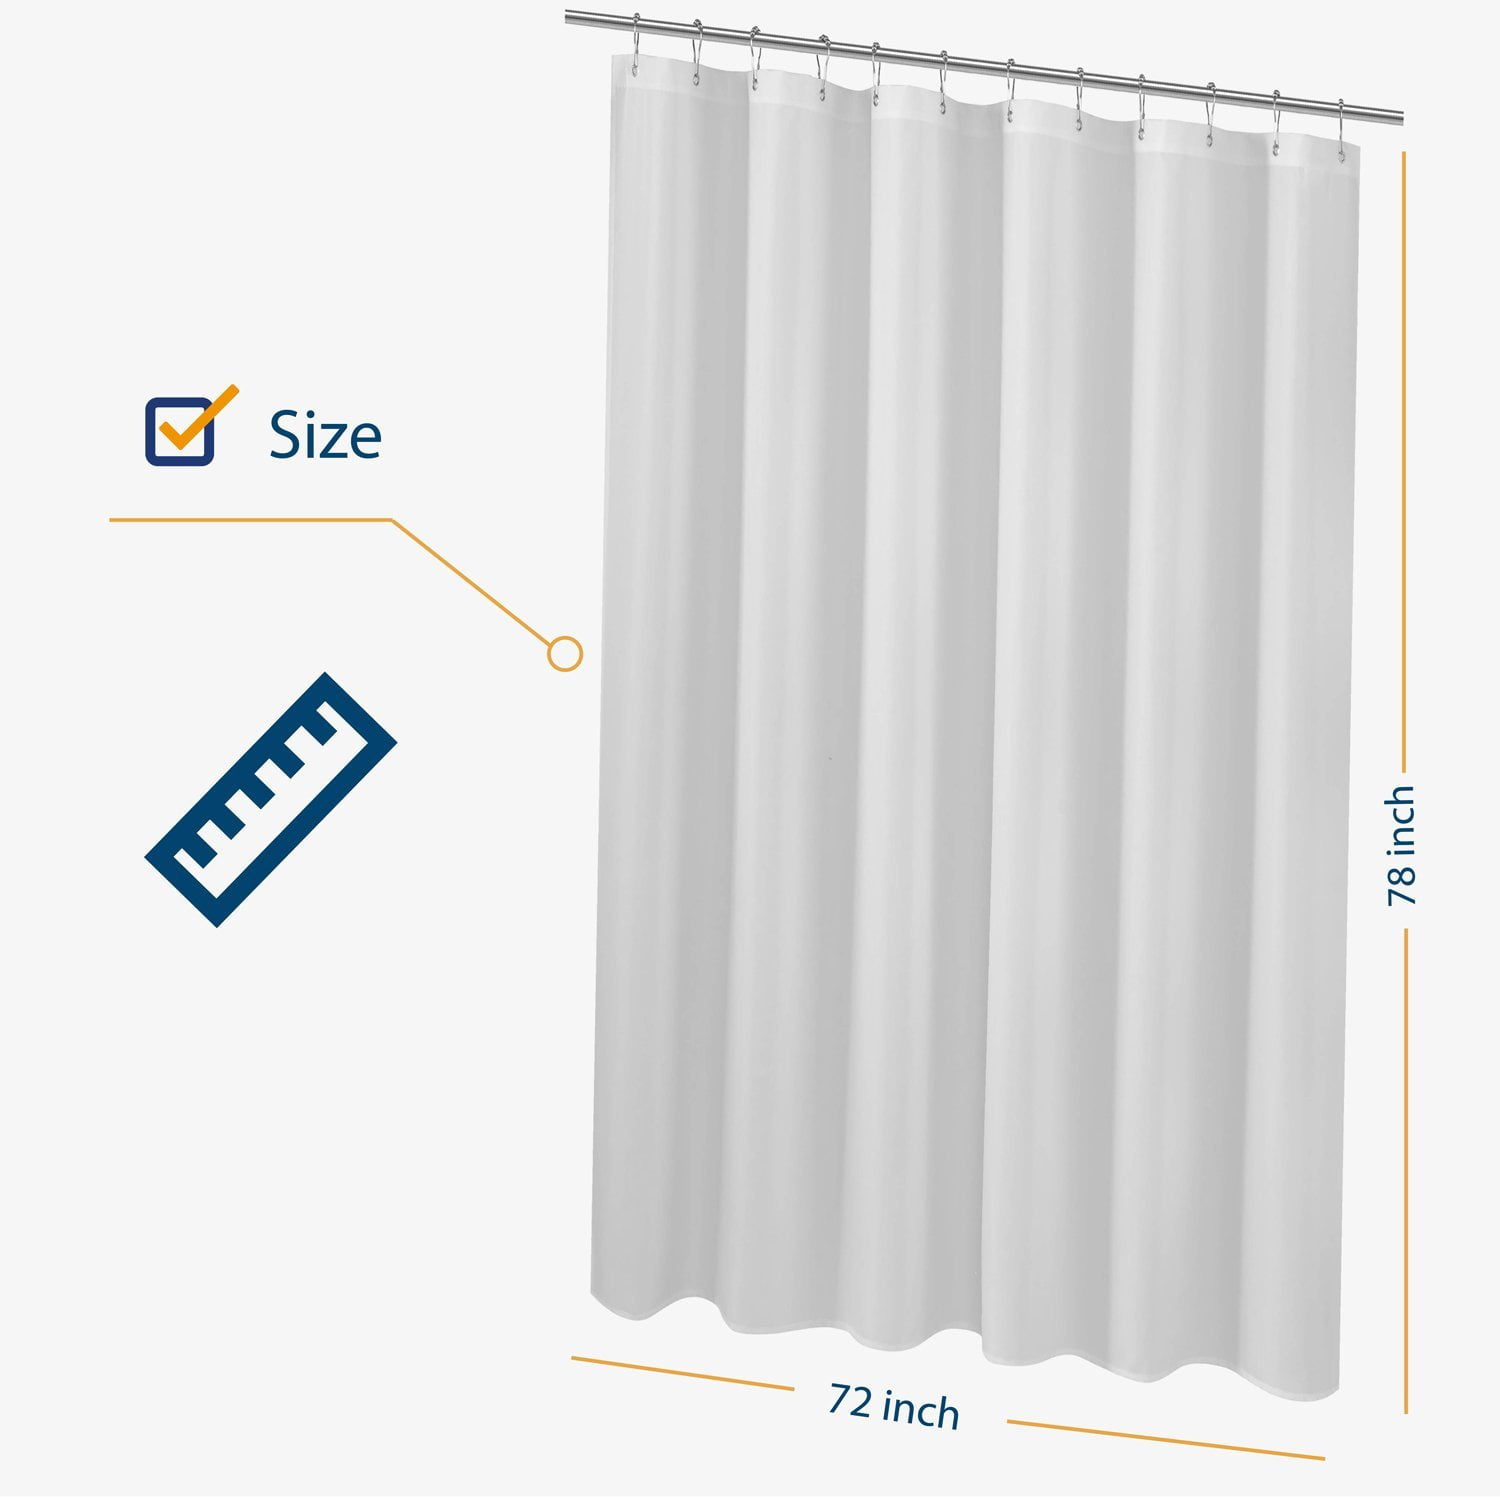 N&Y HOME Fabric Shower Curtain Liner Extra Long 72 x 84 Inches with 2 Bottom Magnets Hotel Quality Water Repellent 72x84 Washable White Spa Bathroom Curtains with Grommets